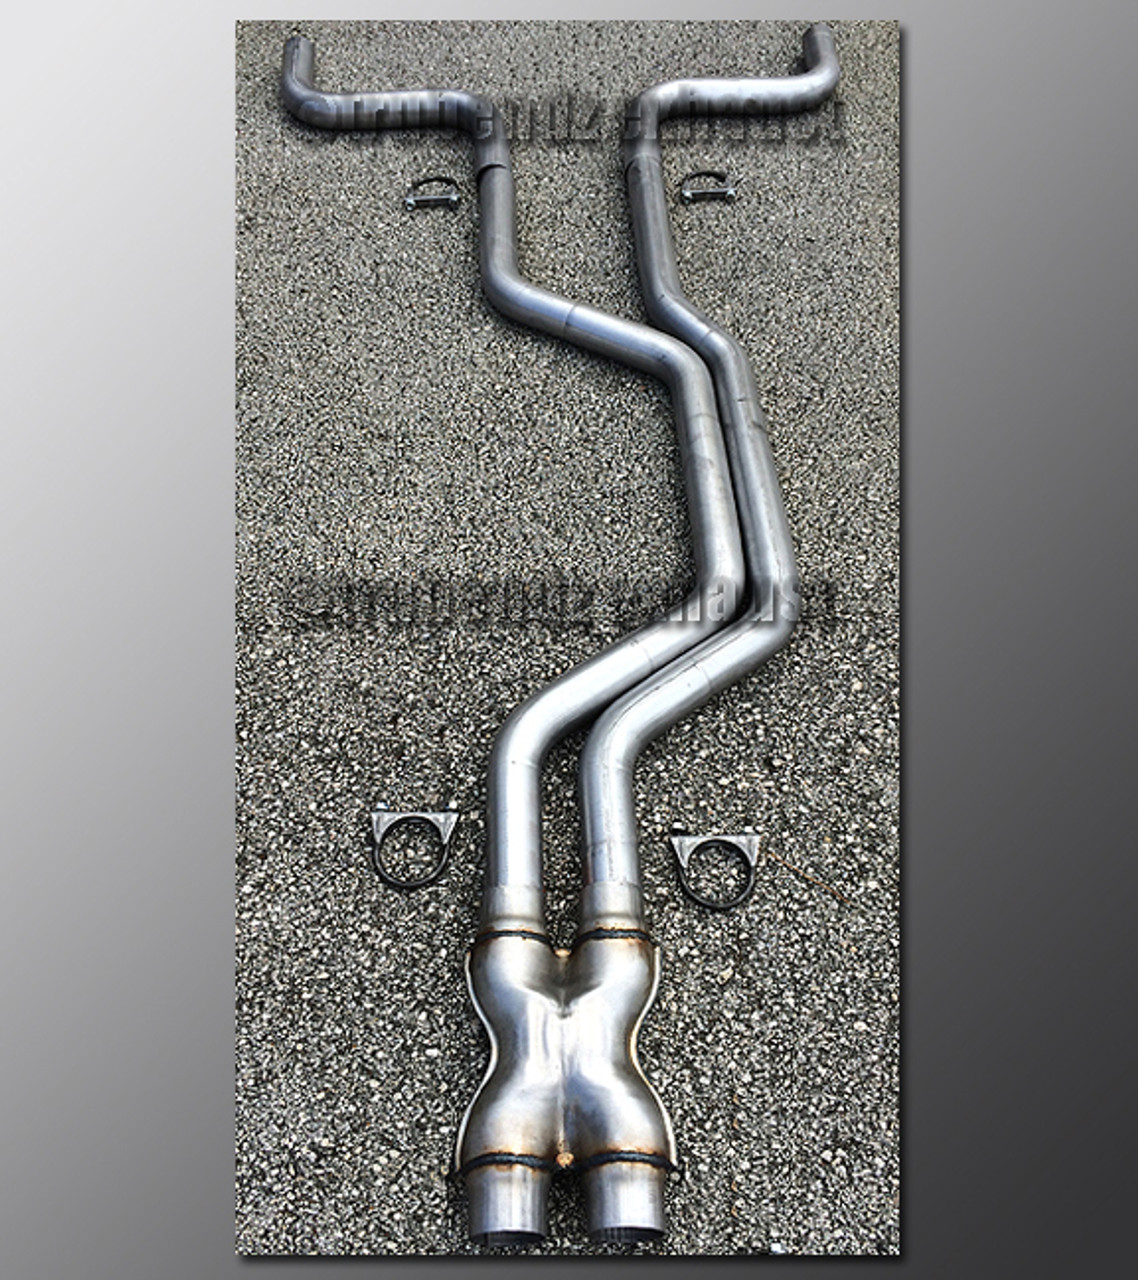 92-97 Ford Thunderbird Dual Exhaust Tubing - 2.5 Inch 304 Stainless with X- Pipe - TruBendz Technology